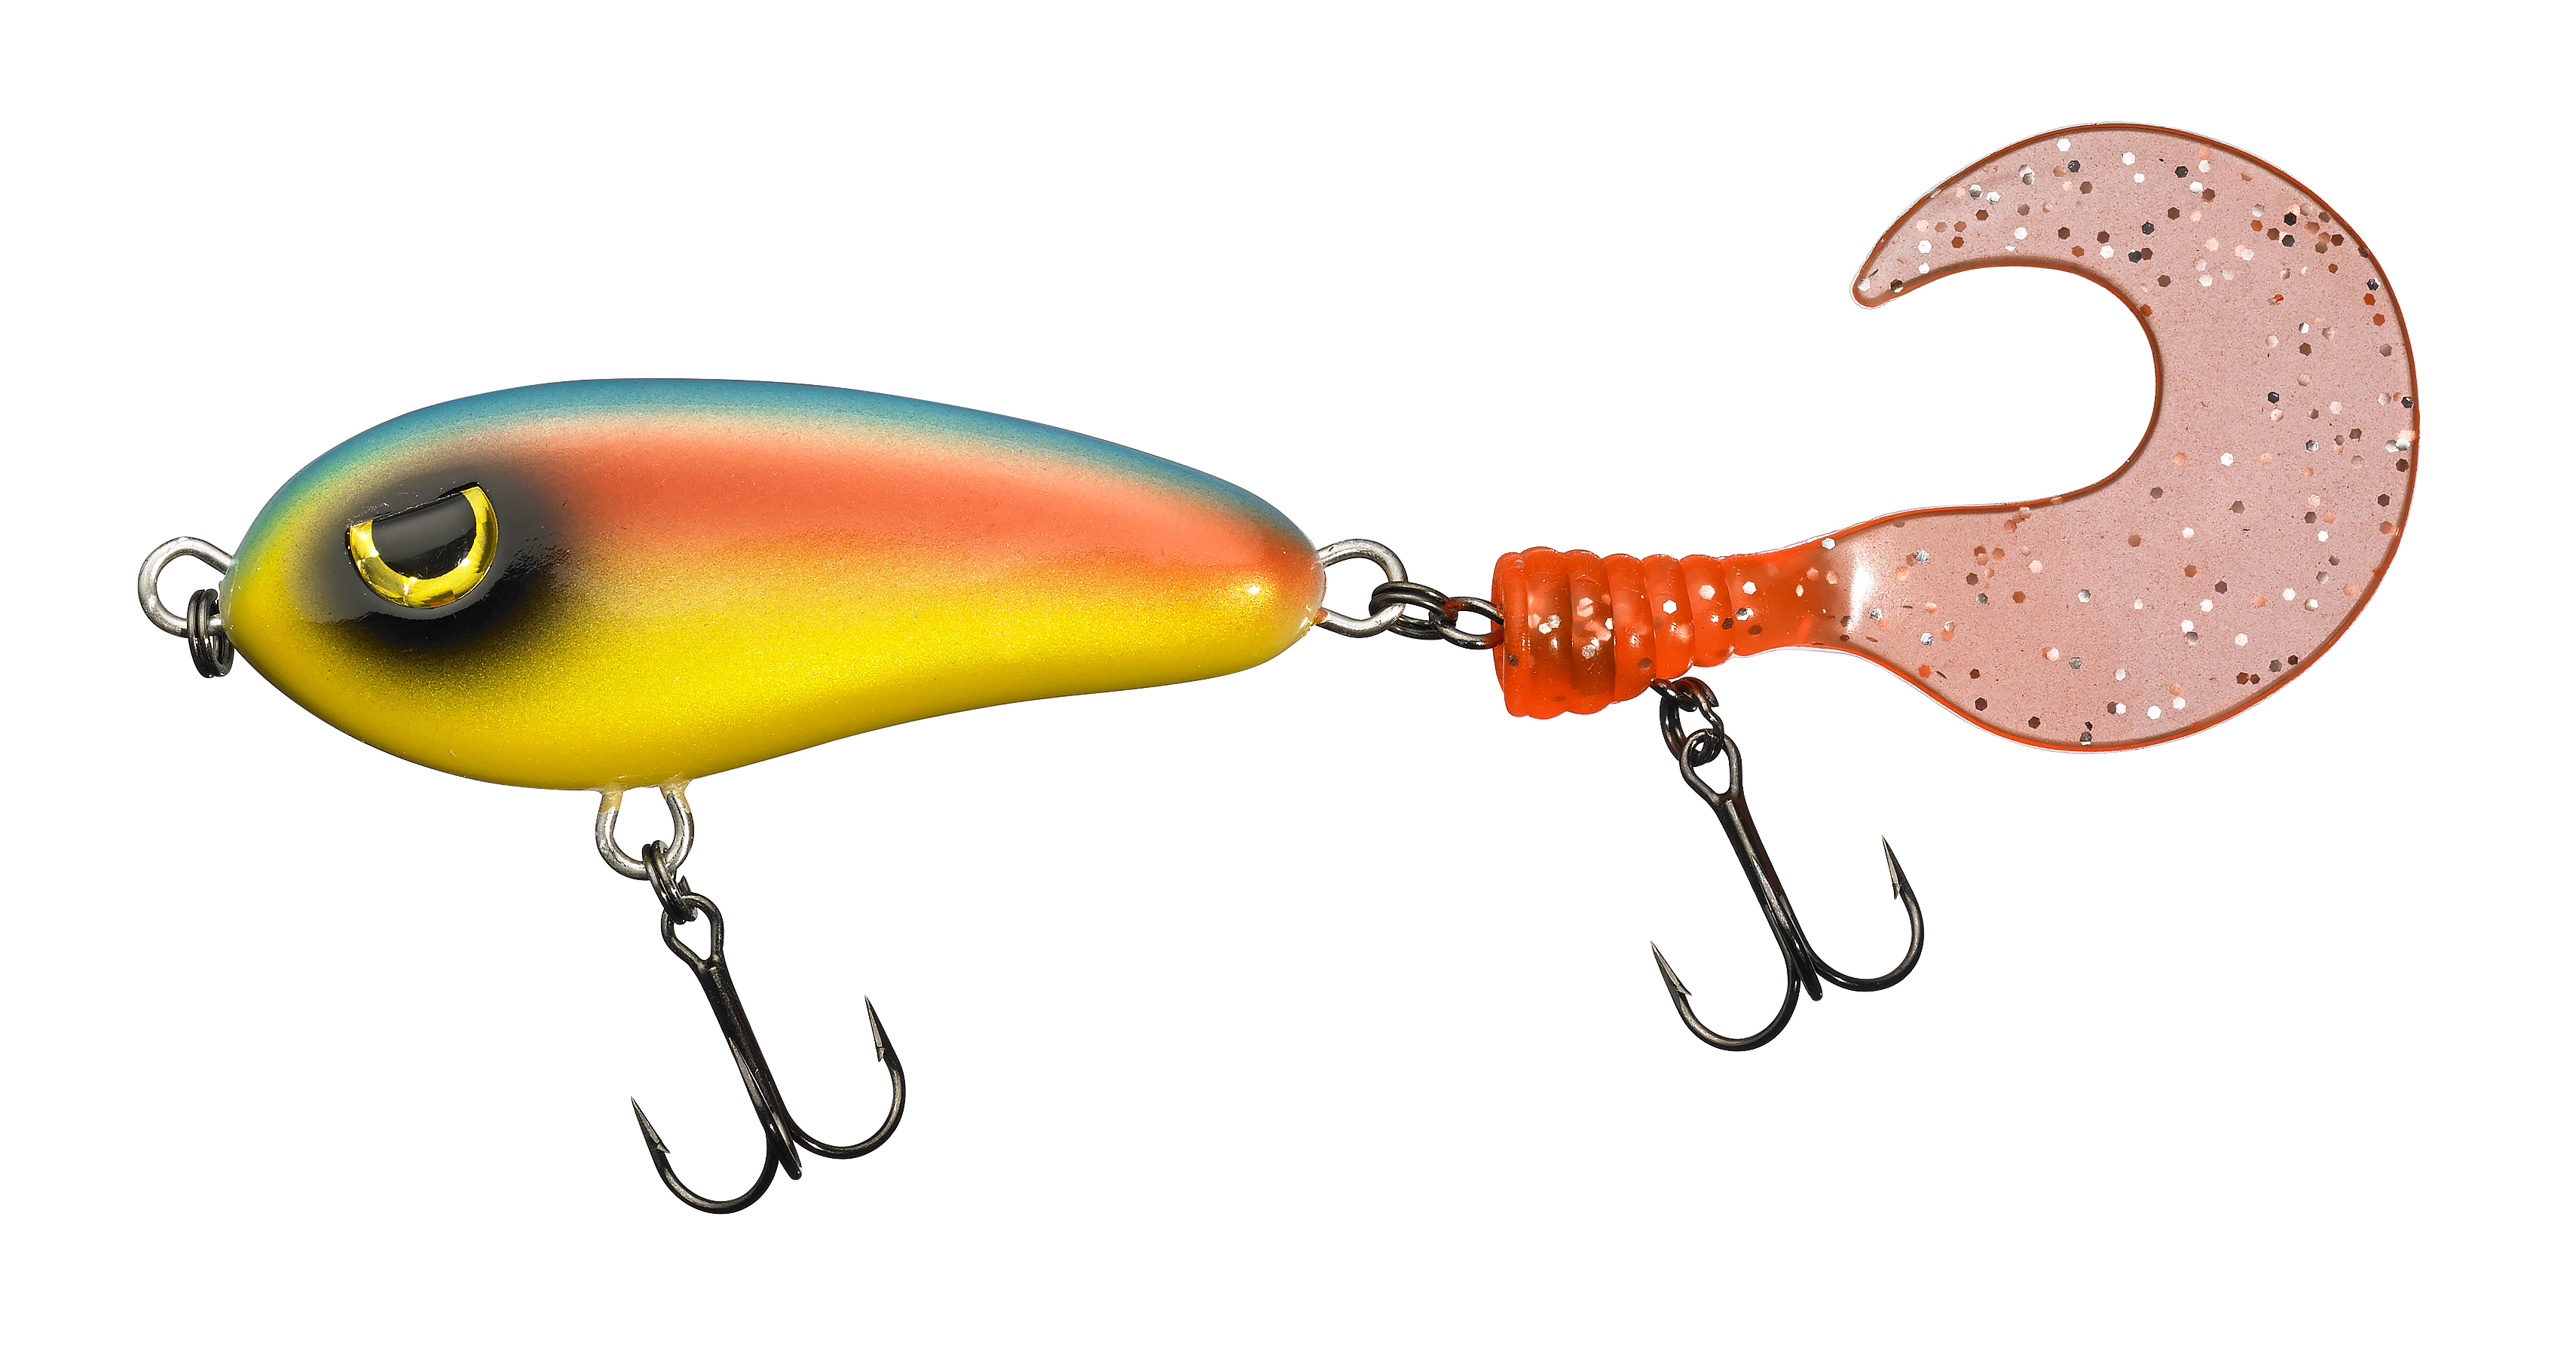 Fladen Maxximus Predator Tail Or Jnr Pike and Bass Fishing Lure Various Colours 